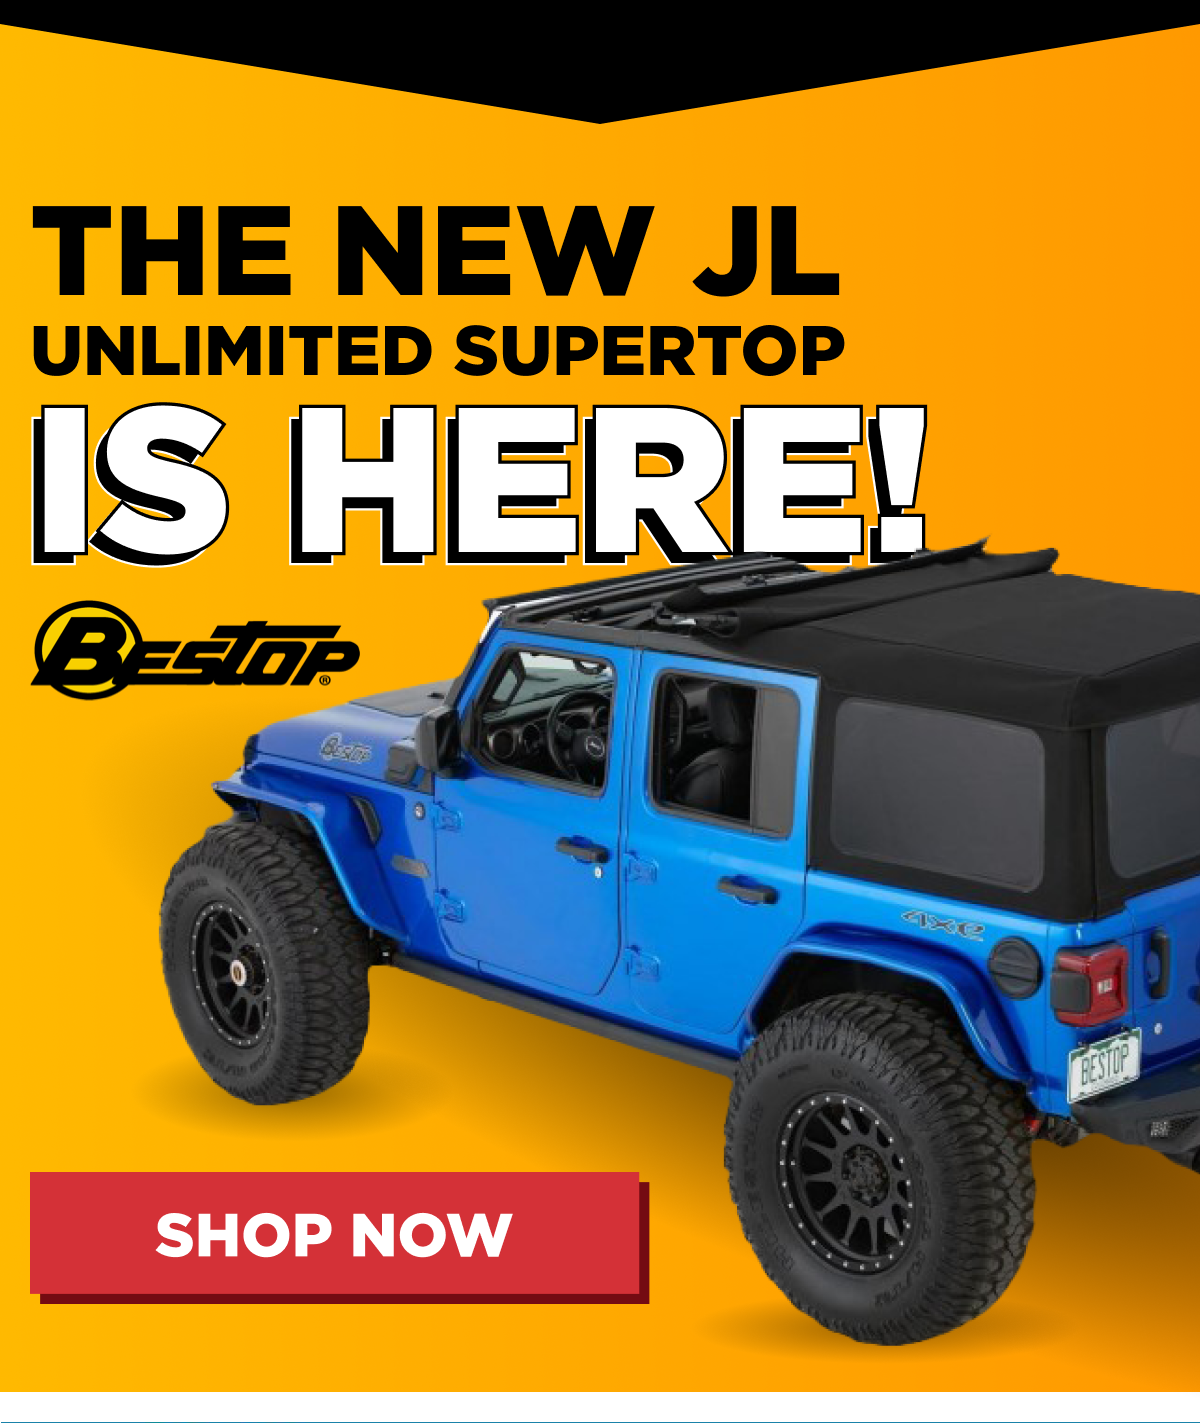 The New JL Unlimited Supertop is Here! 